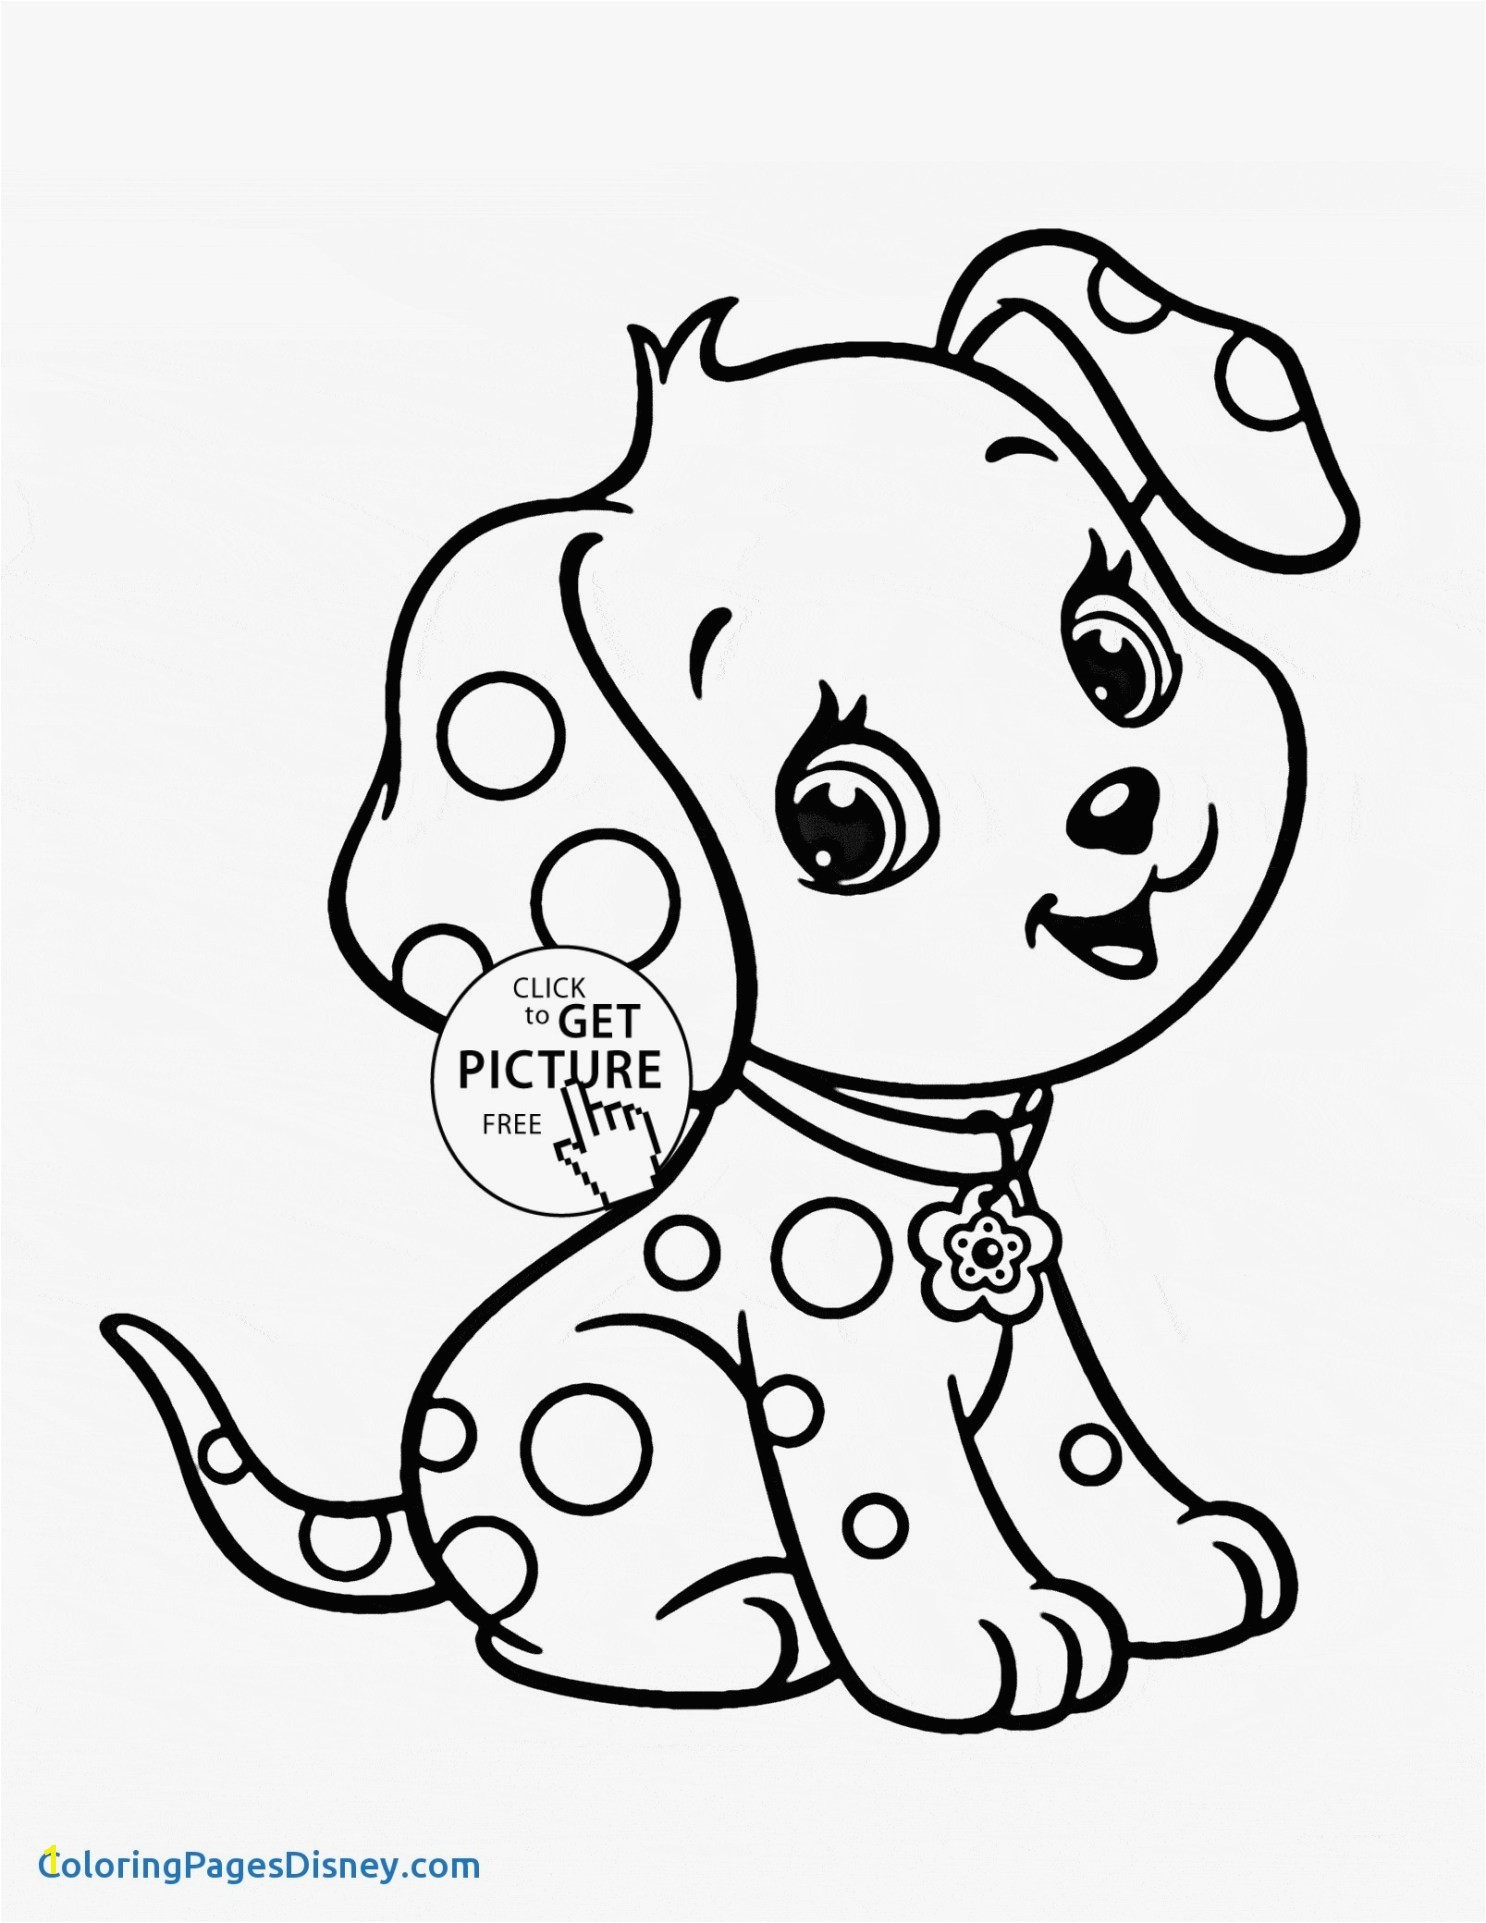 Free Downloadable Coloring Pages From Disney 12 Fresh Disney Printable Coloring Pages